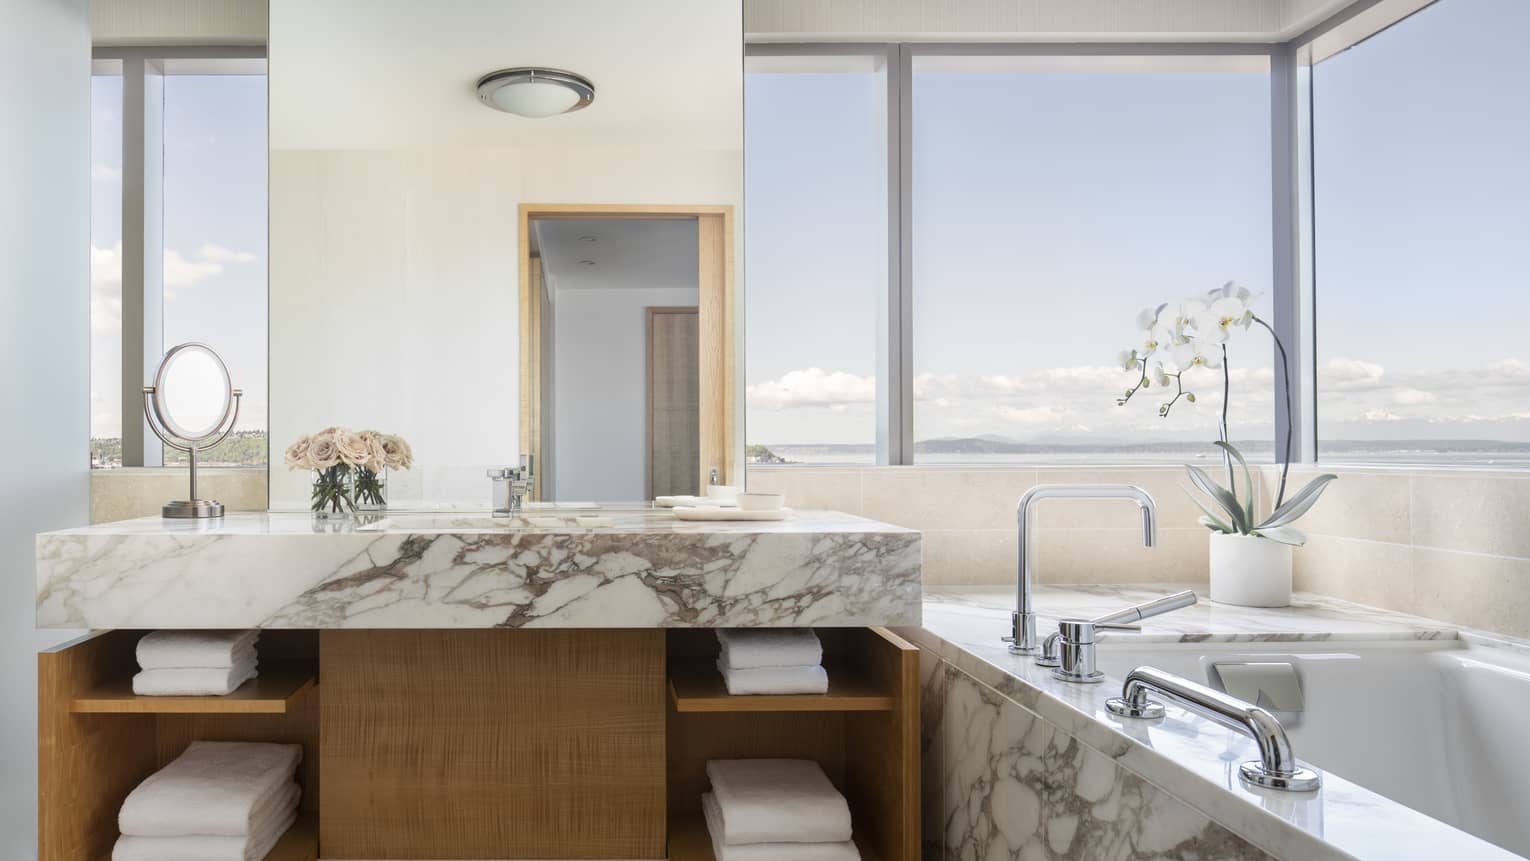 A marble tub and countertops are accented by flowers and multiple windows